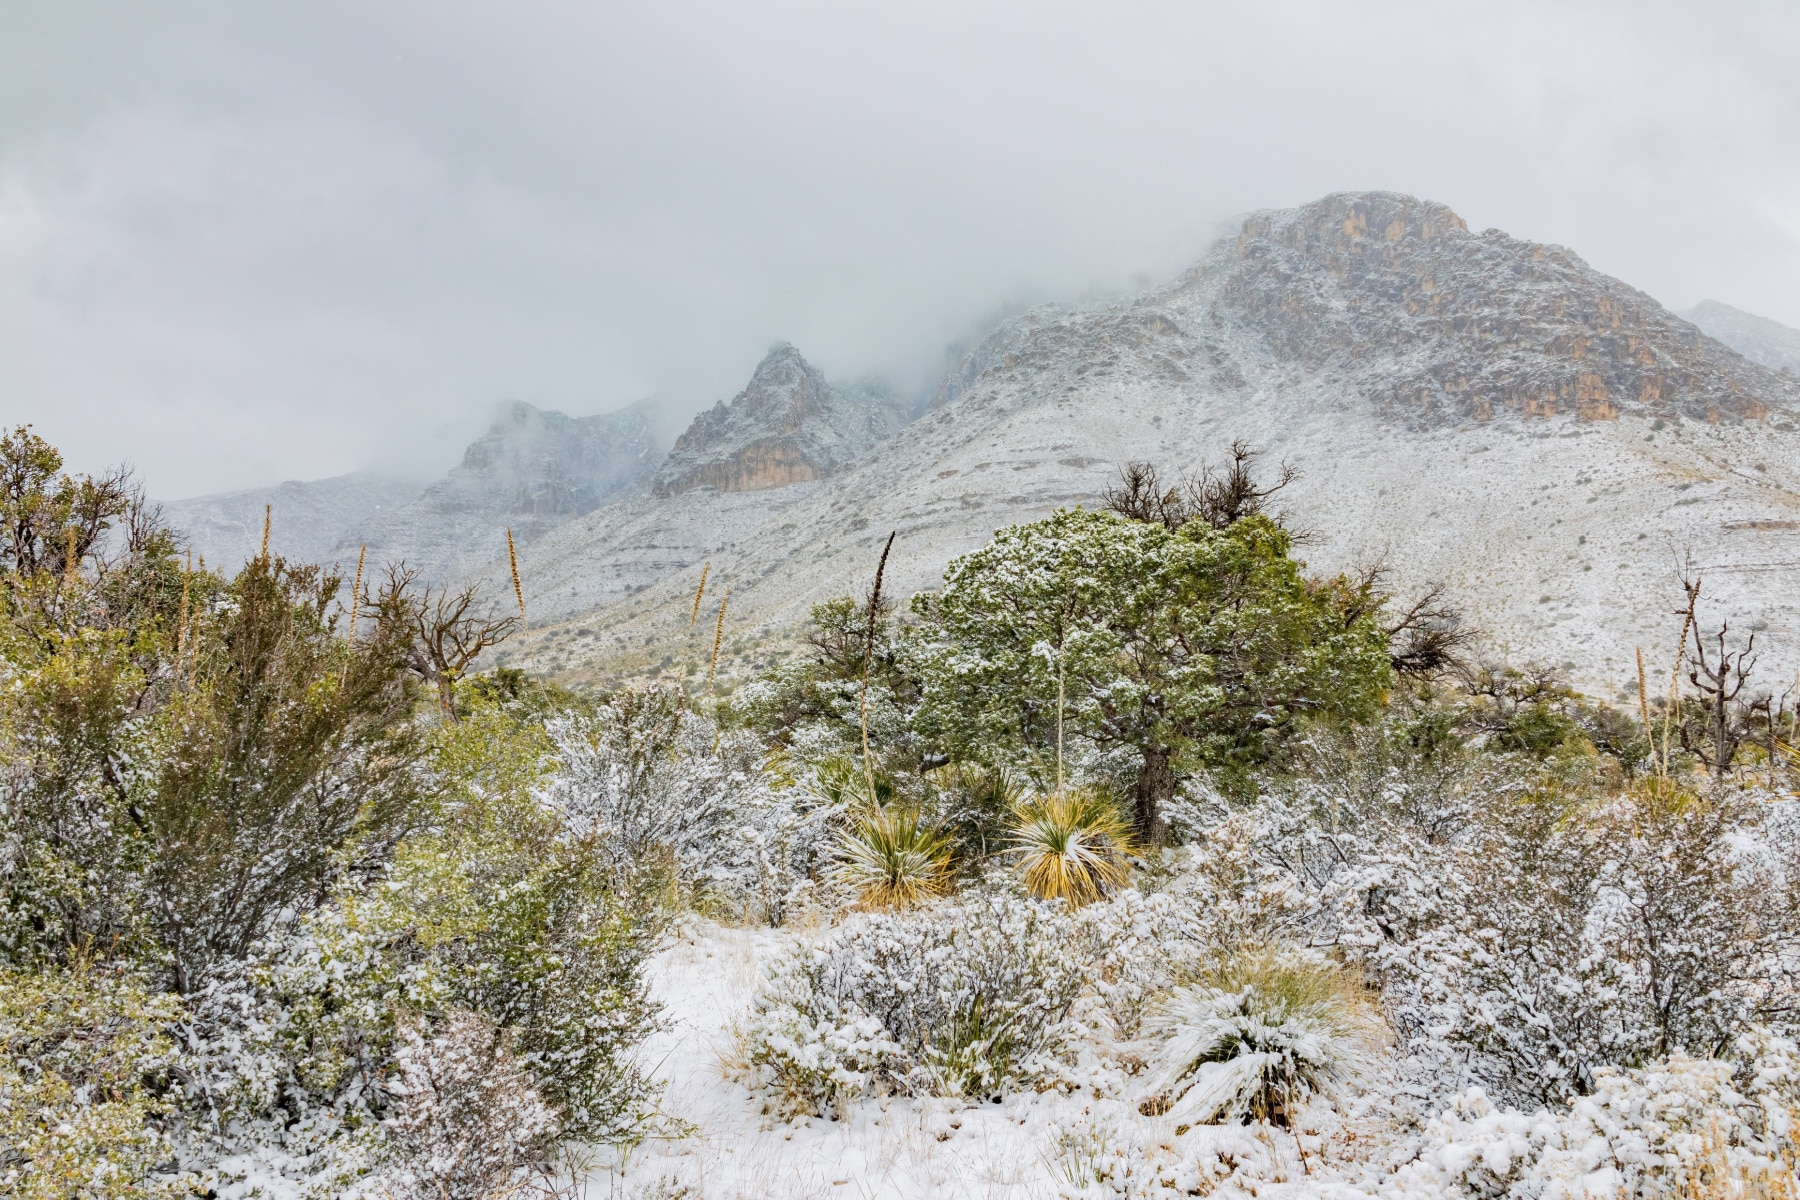 Snow over the landscape in Guadalupe Mountains National Park.